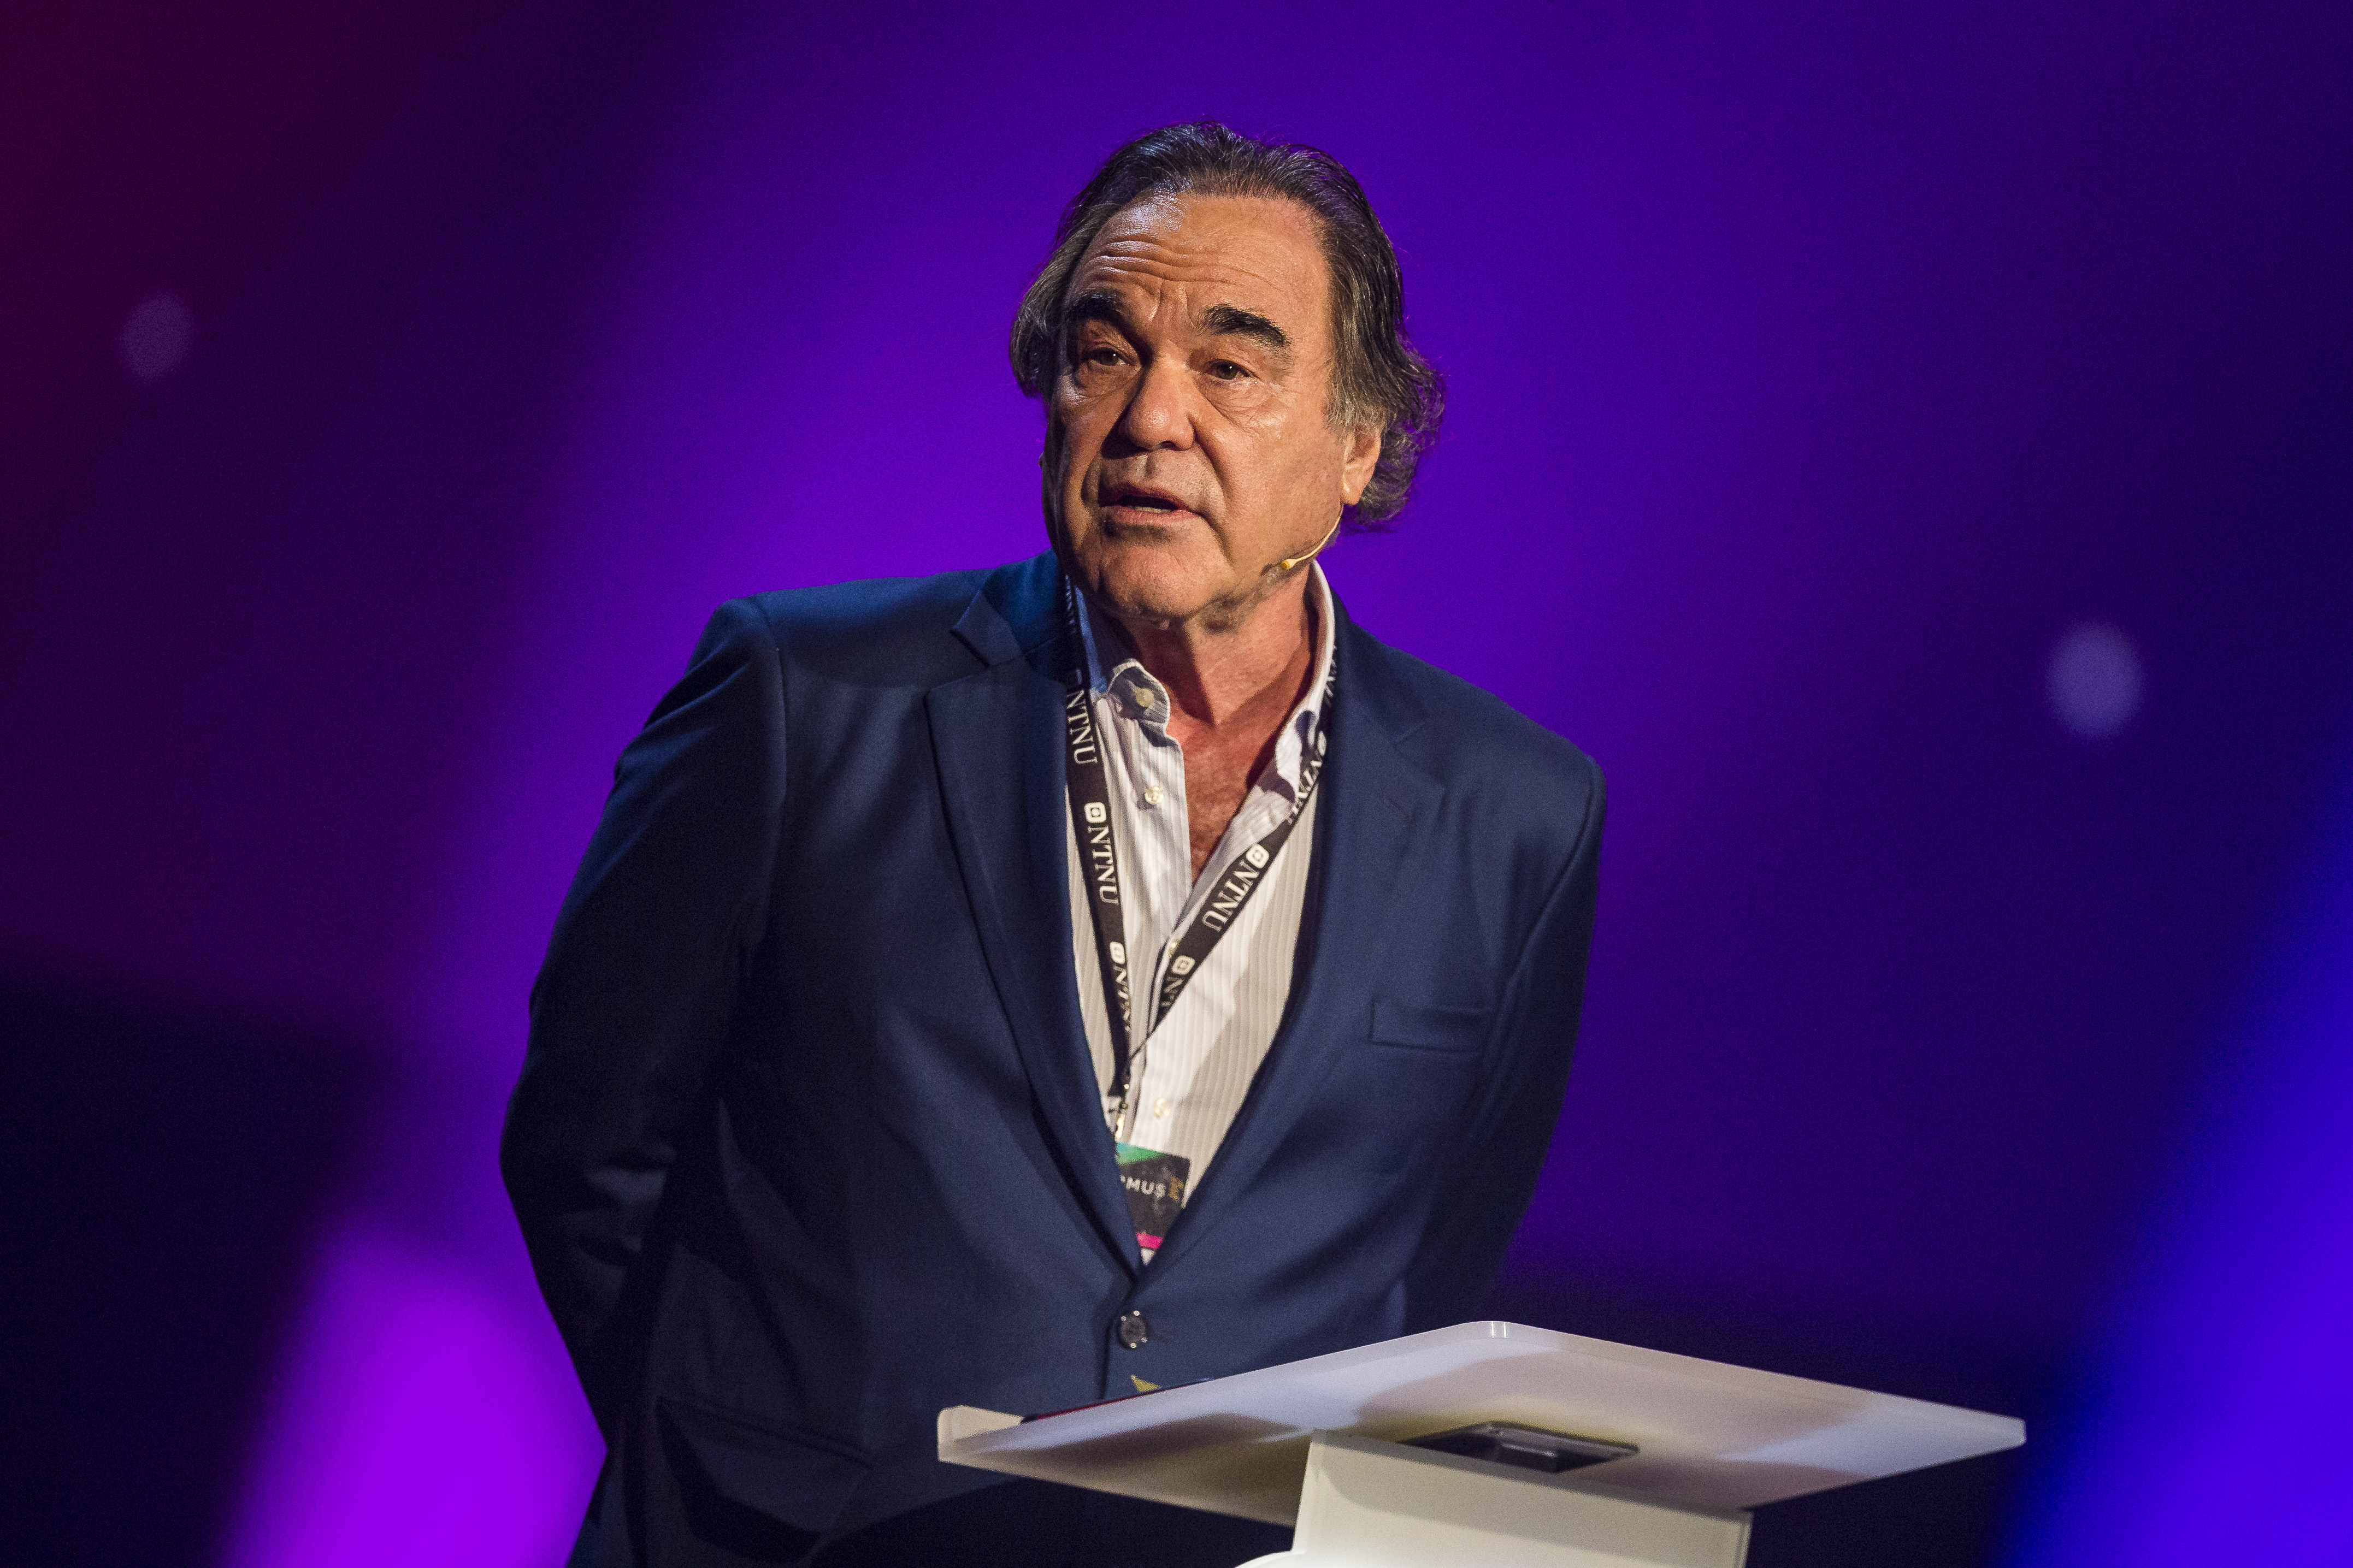 Oliver Stone gives a speech during the Starmus Festival in Trondheim, Norway, on June 21, 2017. (Michael Campanella—WireImage/Getty Images)